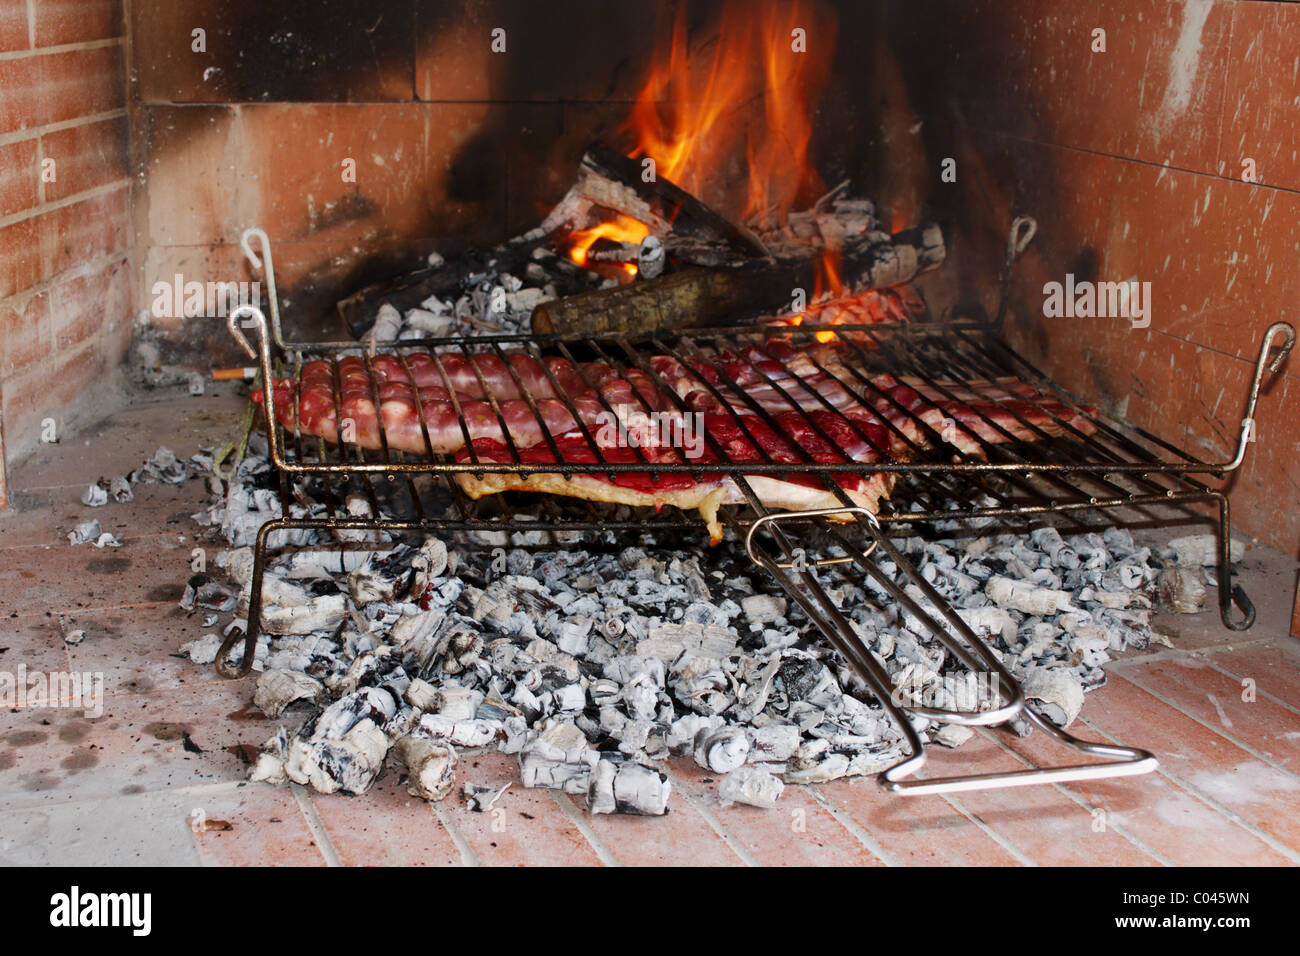 Raw meat just put on the barbecue to cook Stock Photo